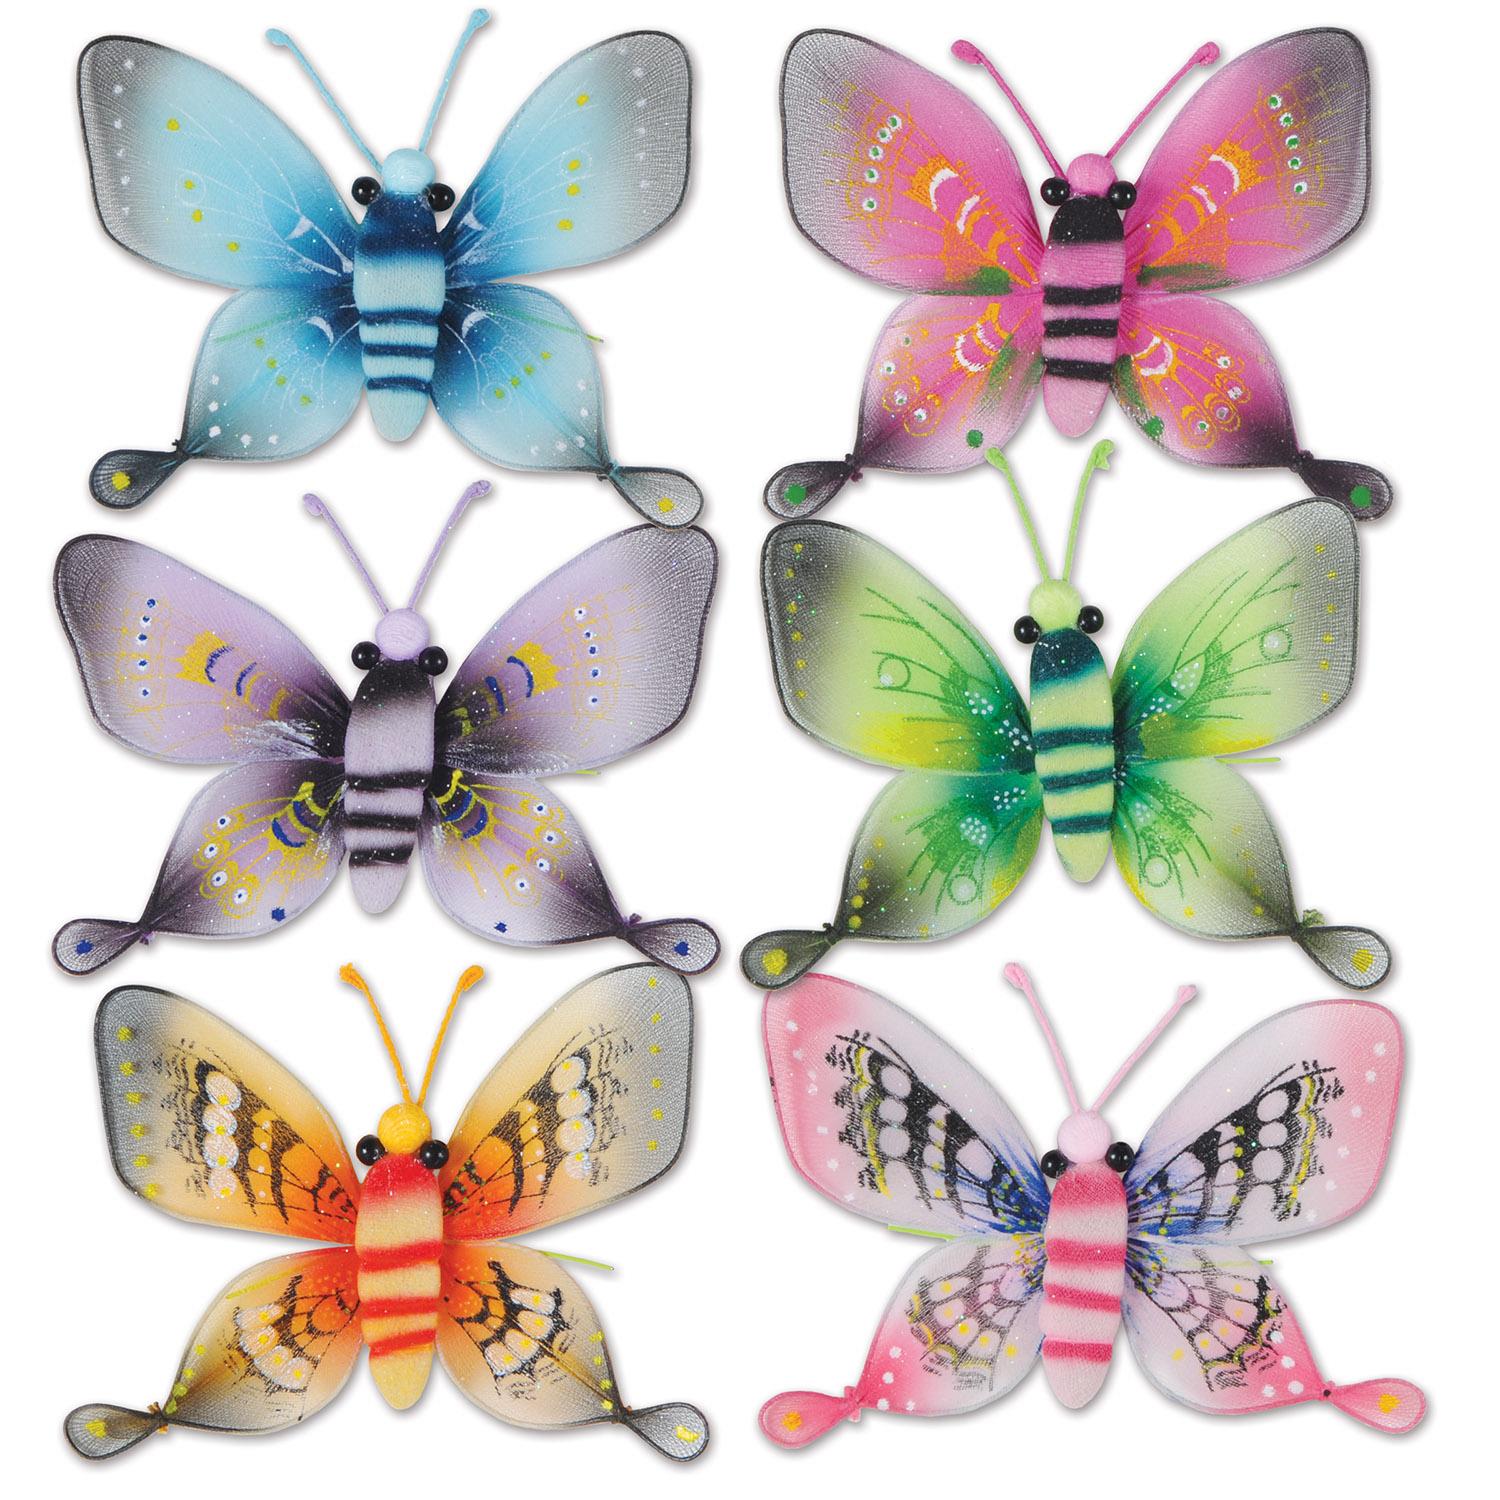 5 Inch- Beistle Majestic Butterfly Party Decoration